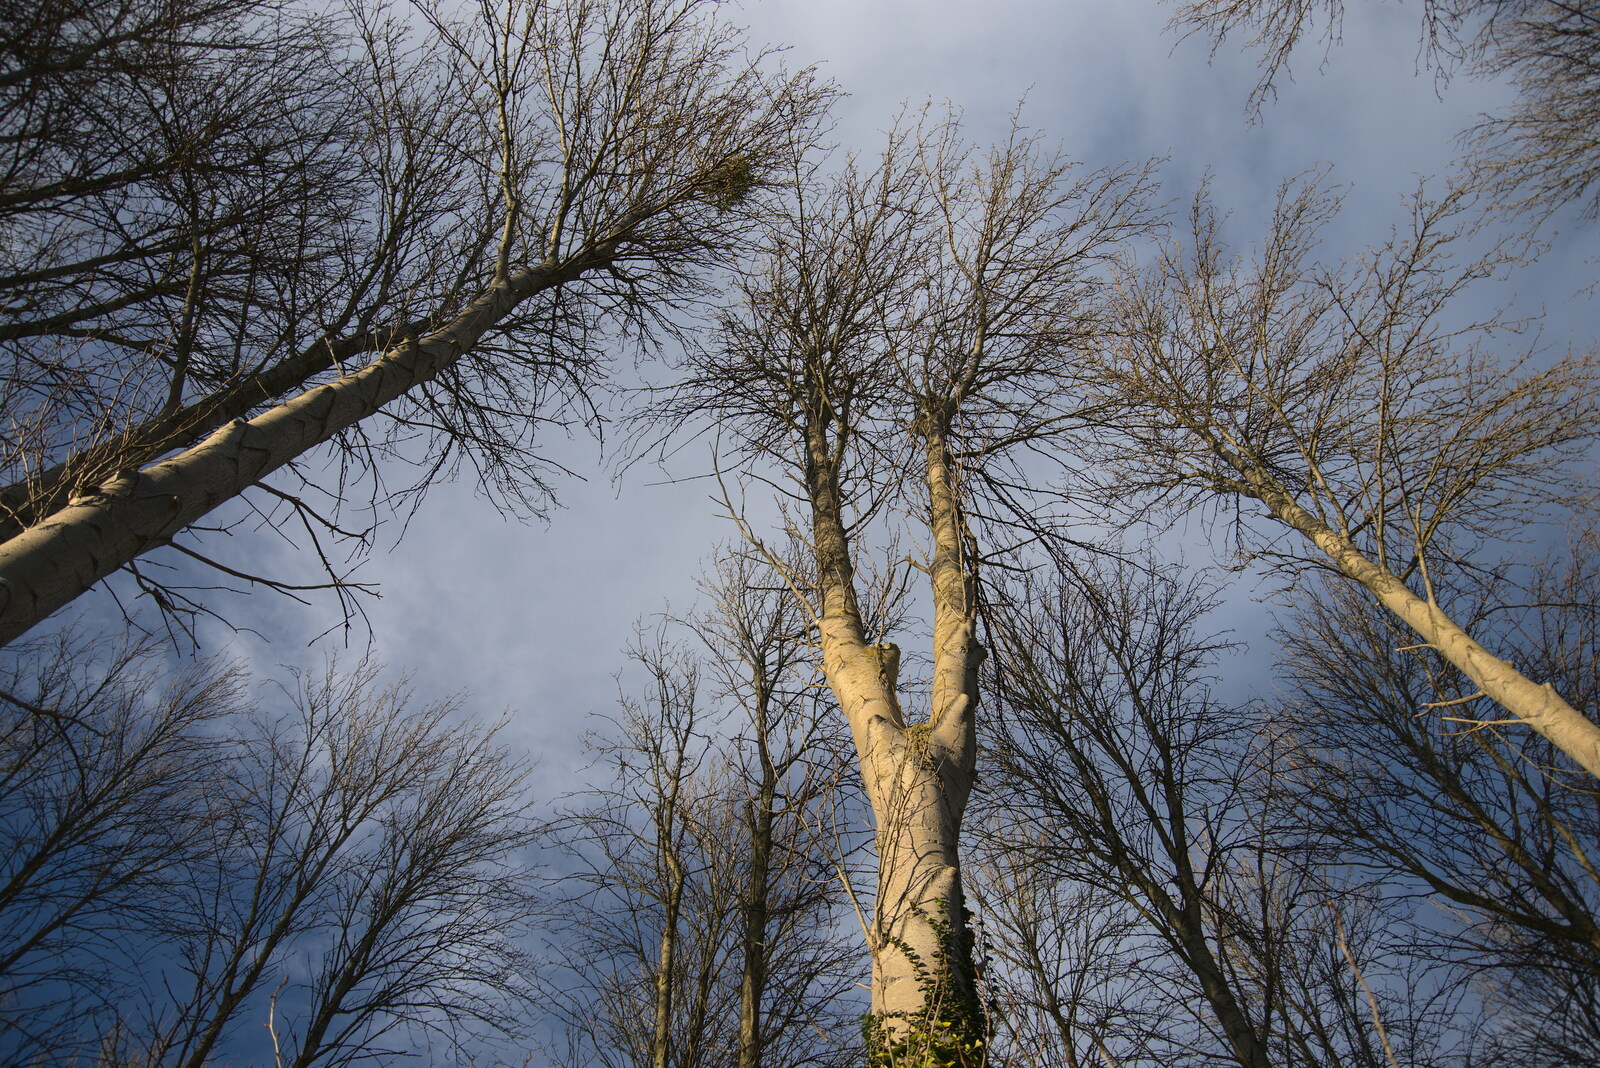 Winter Walks around Brome and Hoxne, Suffolk - 2nd January 2023: Skeleton trees reach for the sky